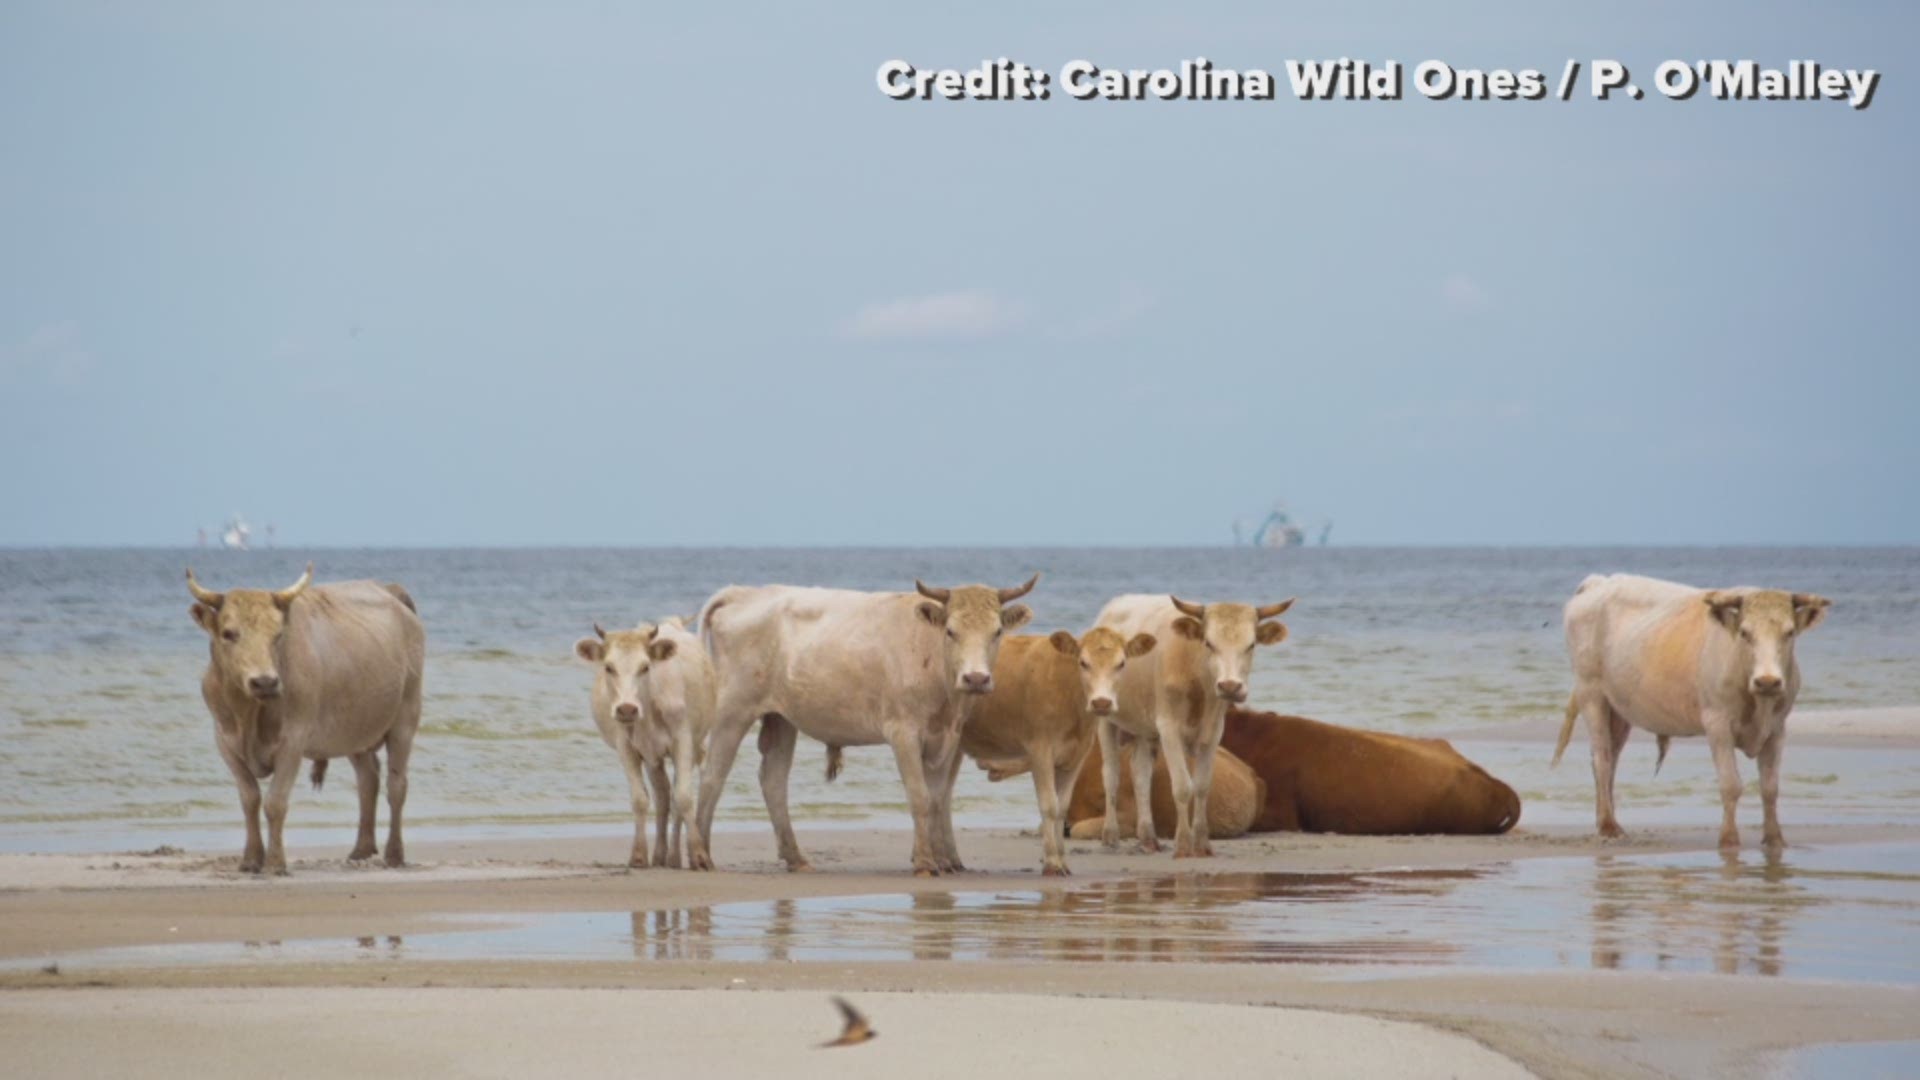 A compilation of photos showing a herd of wild cows and horses roaming the shores of Cedar Island, North Carolina.